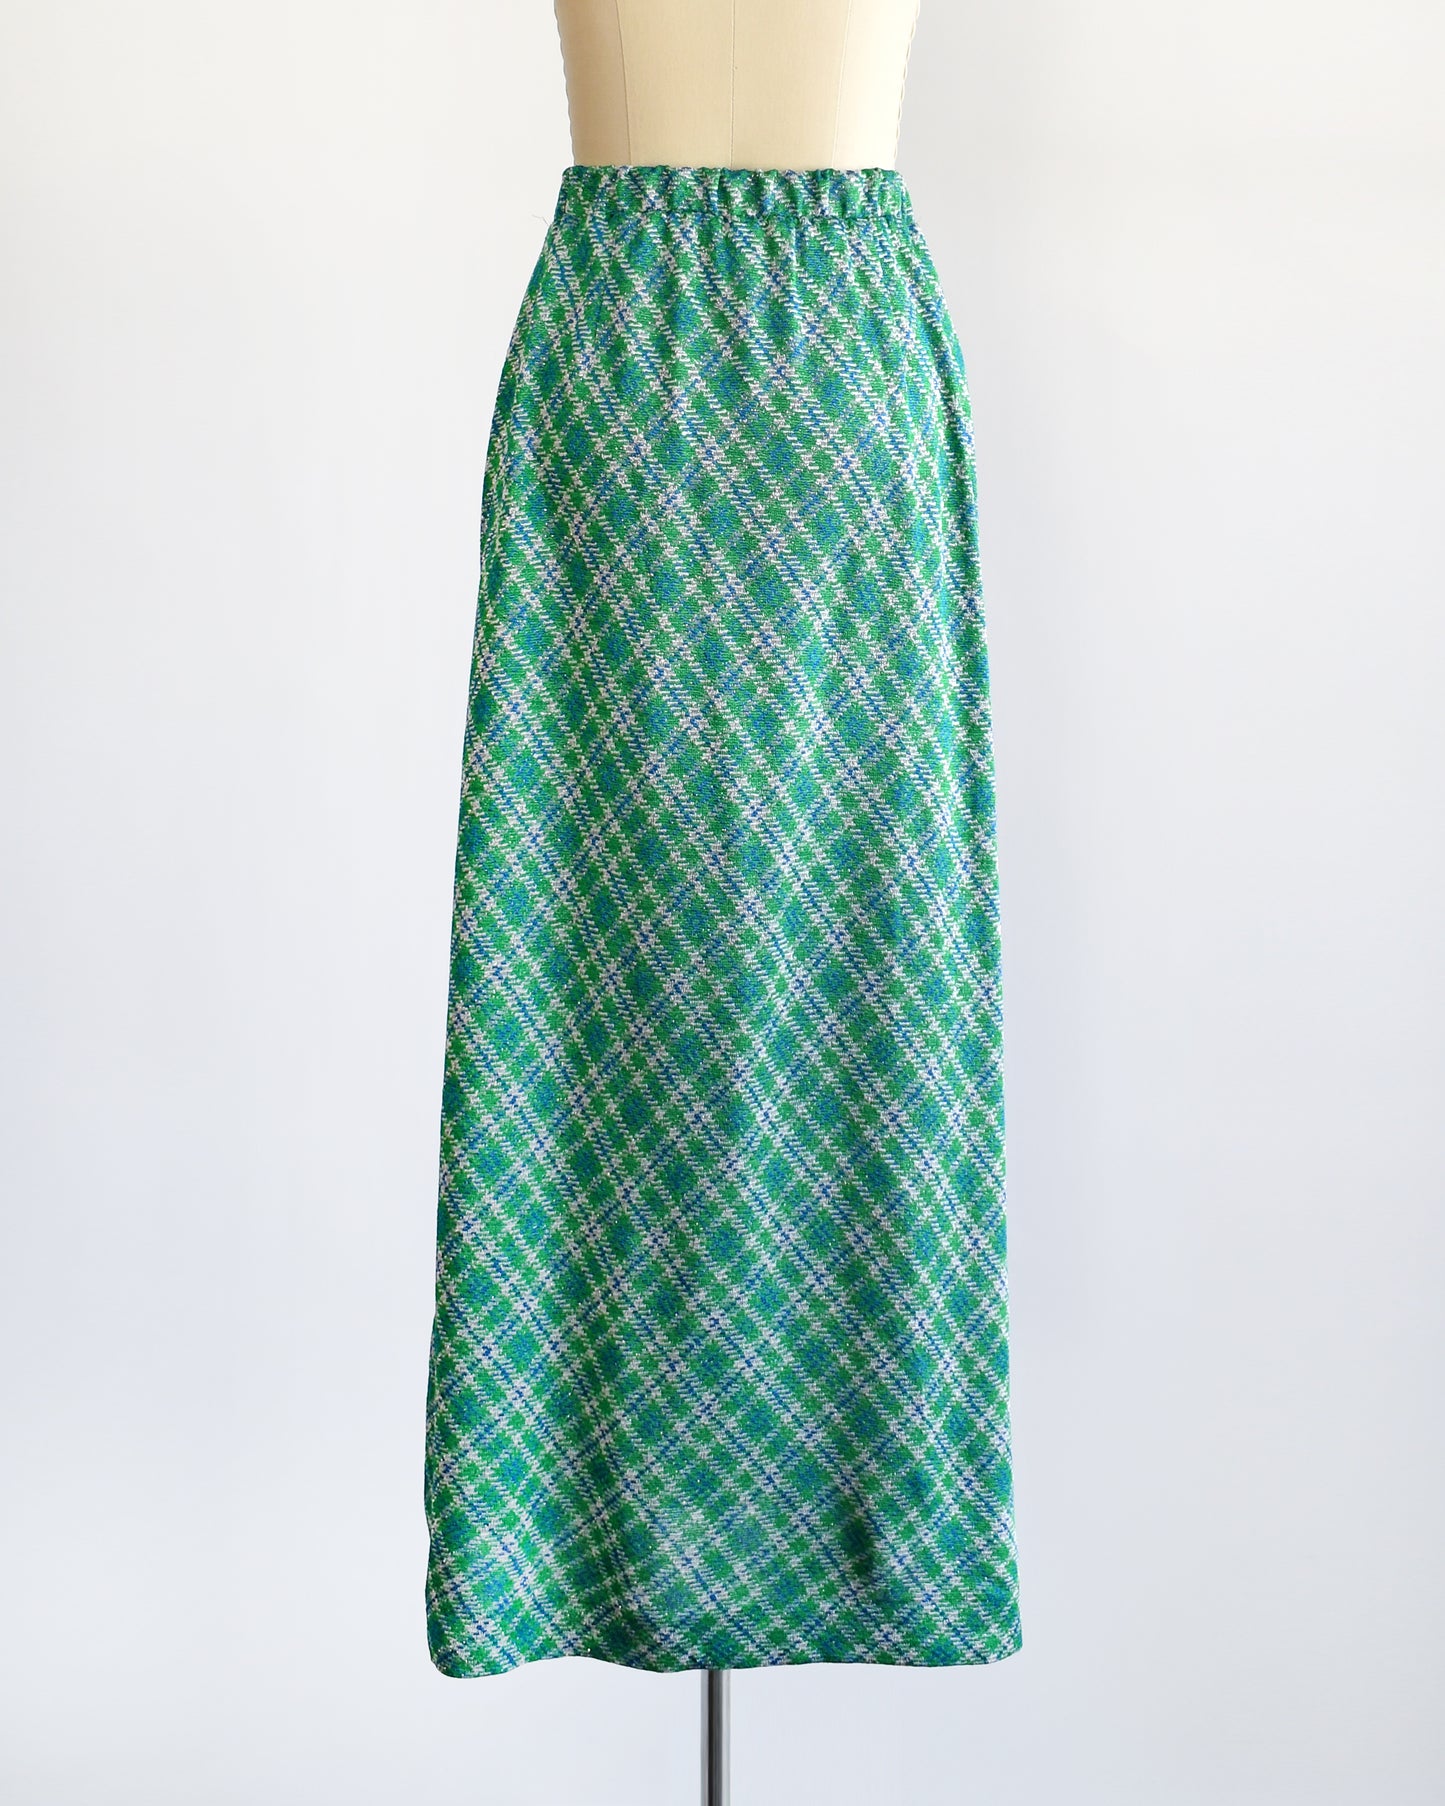 Back view of a vintage 1970s maxi skirt that features festive green, blue, and white plaid fabric with silver metallic threads.